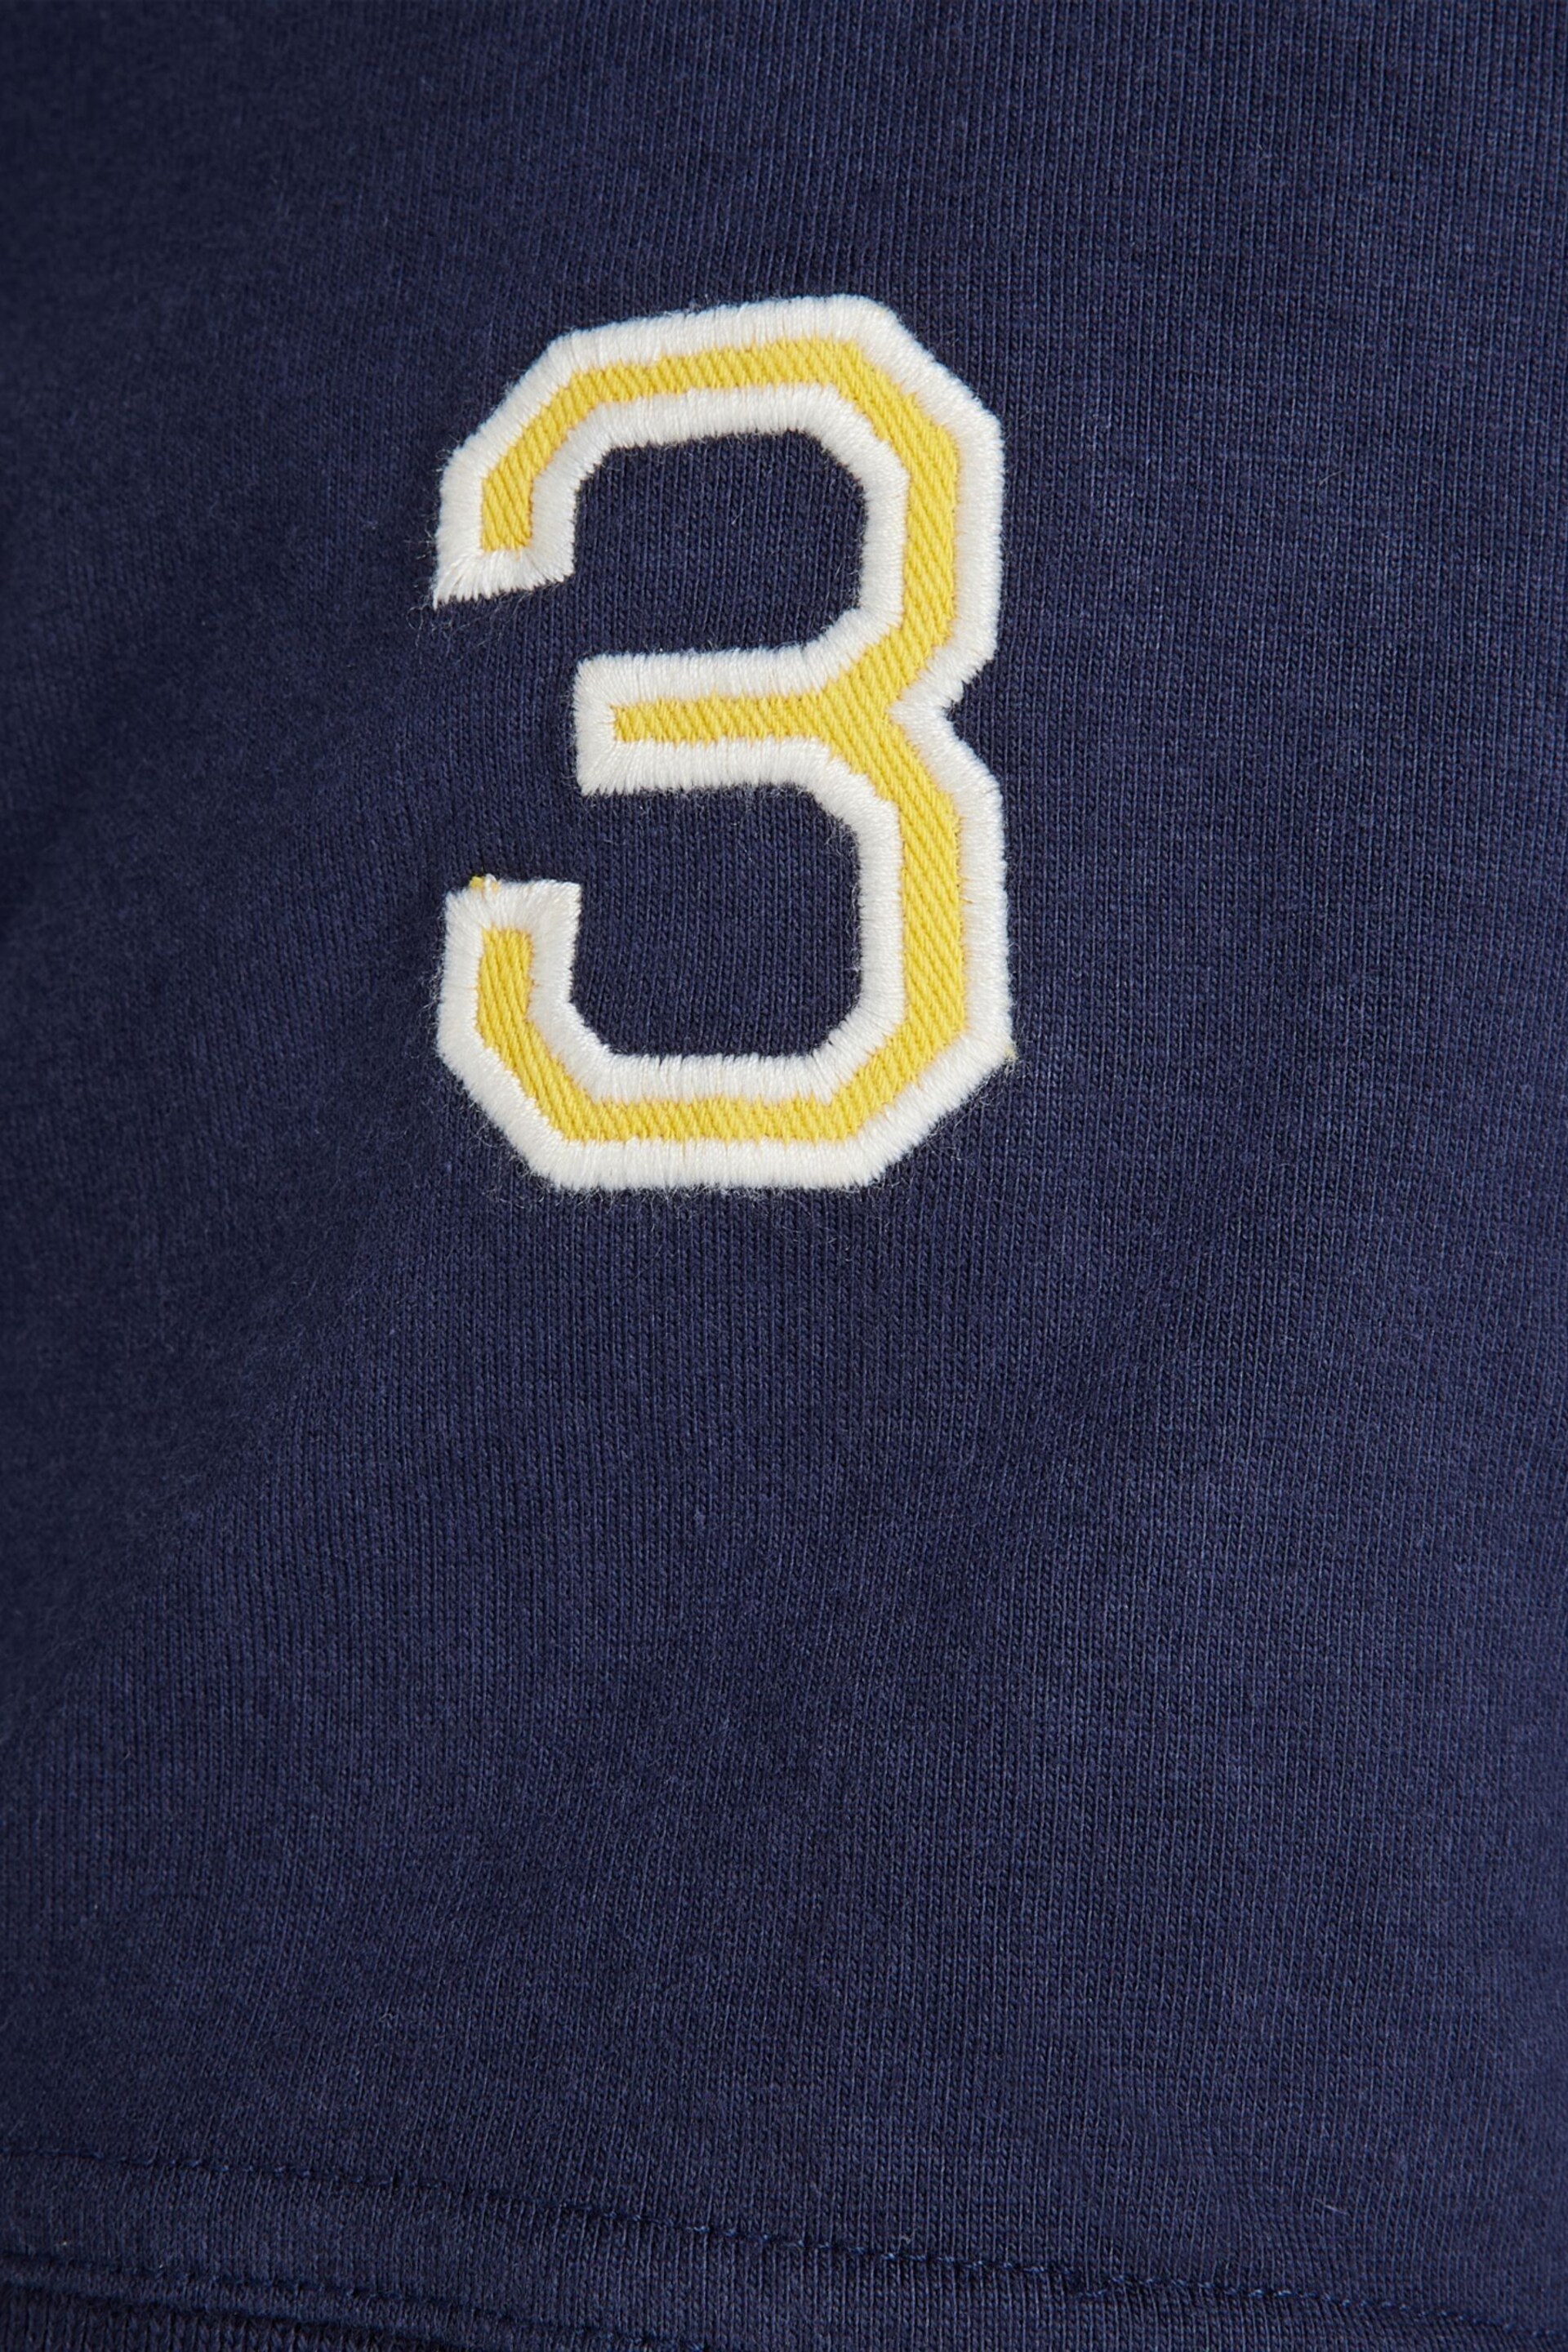 Raging Bull Blue No. 3 Jersey Polo Shirt - Image 7 of 8